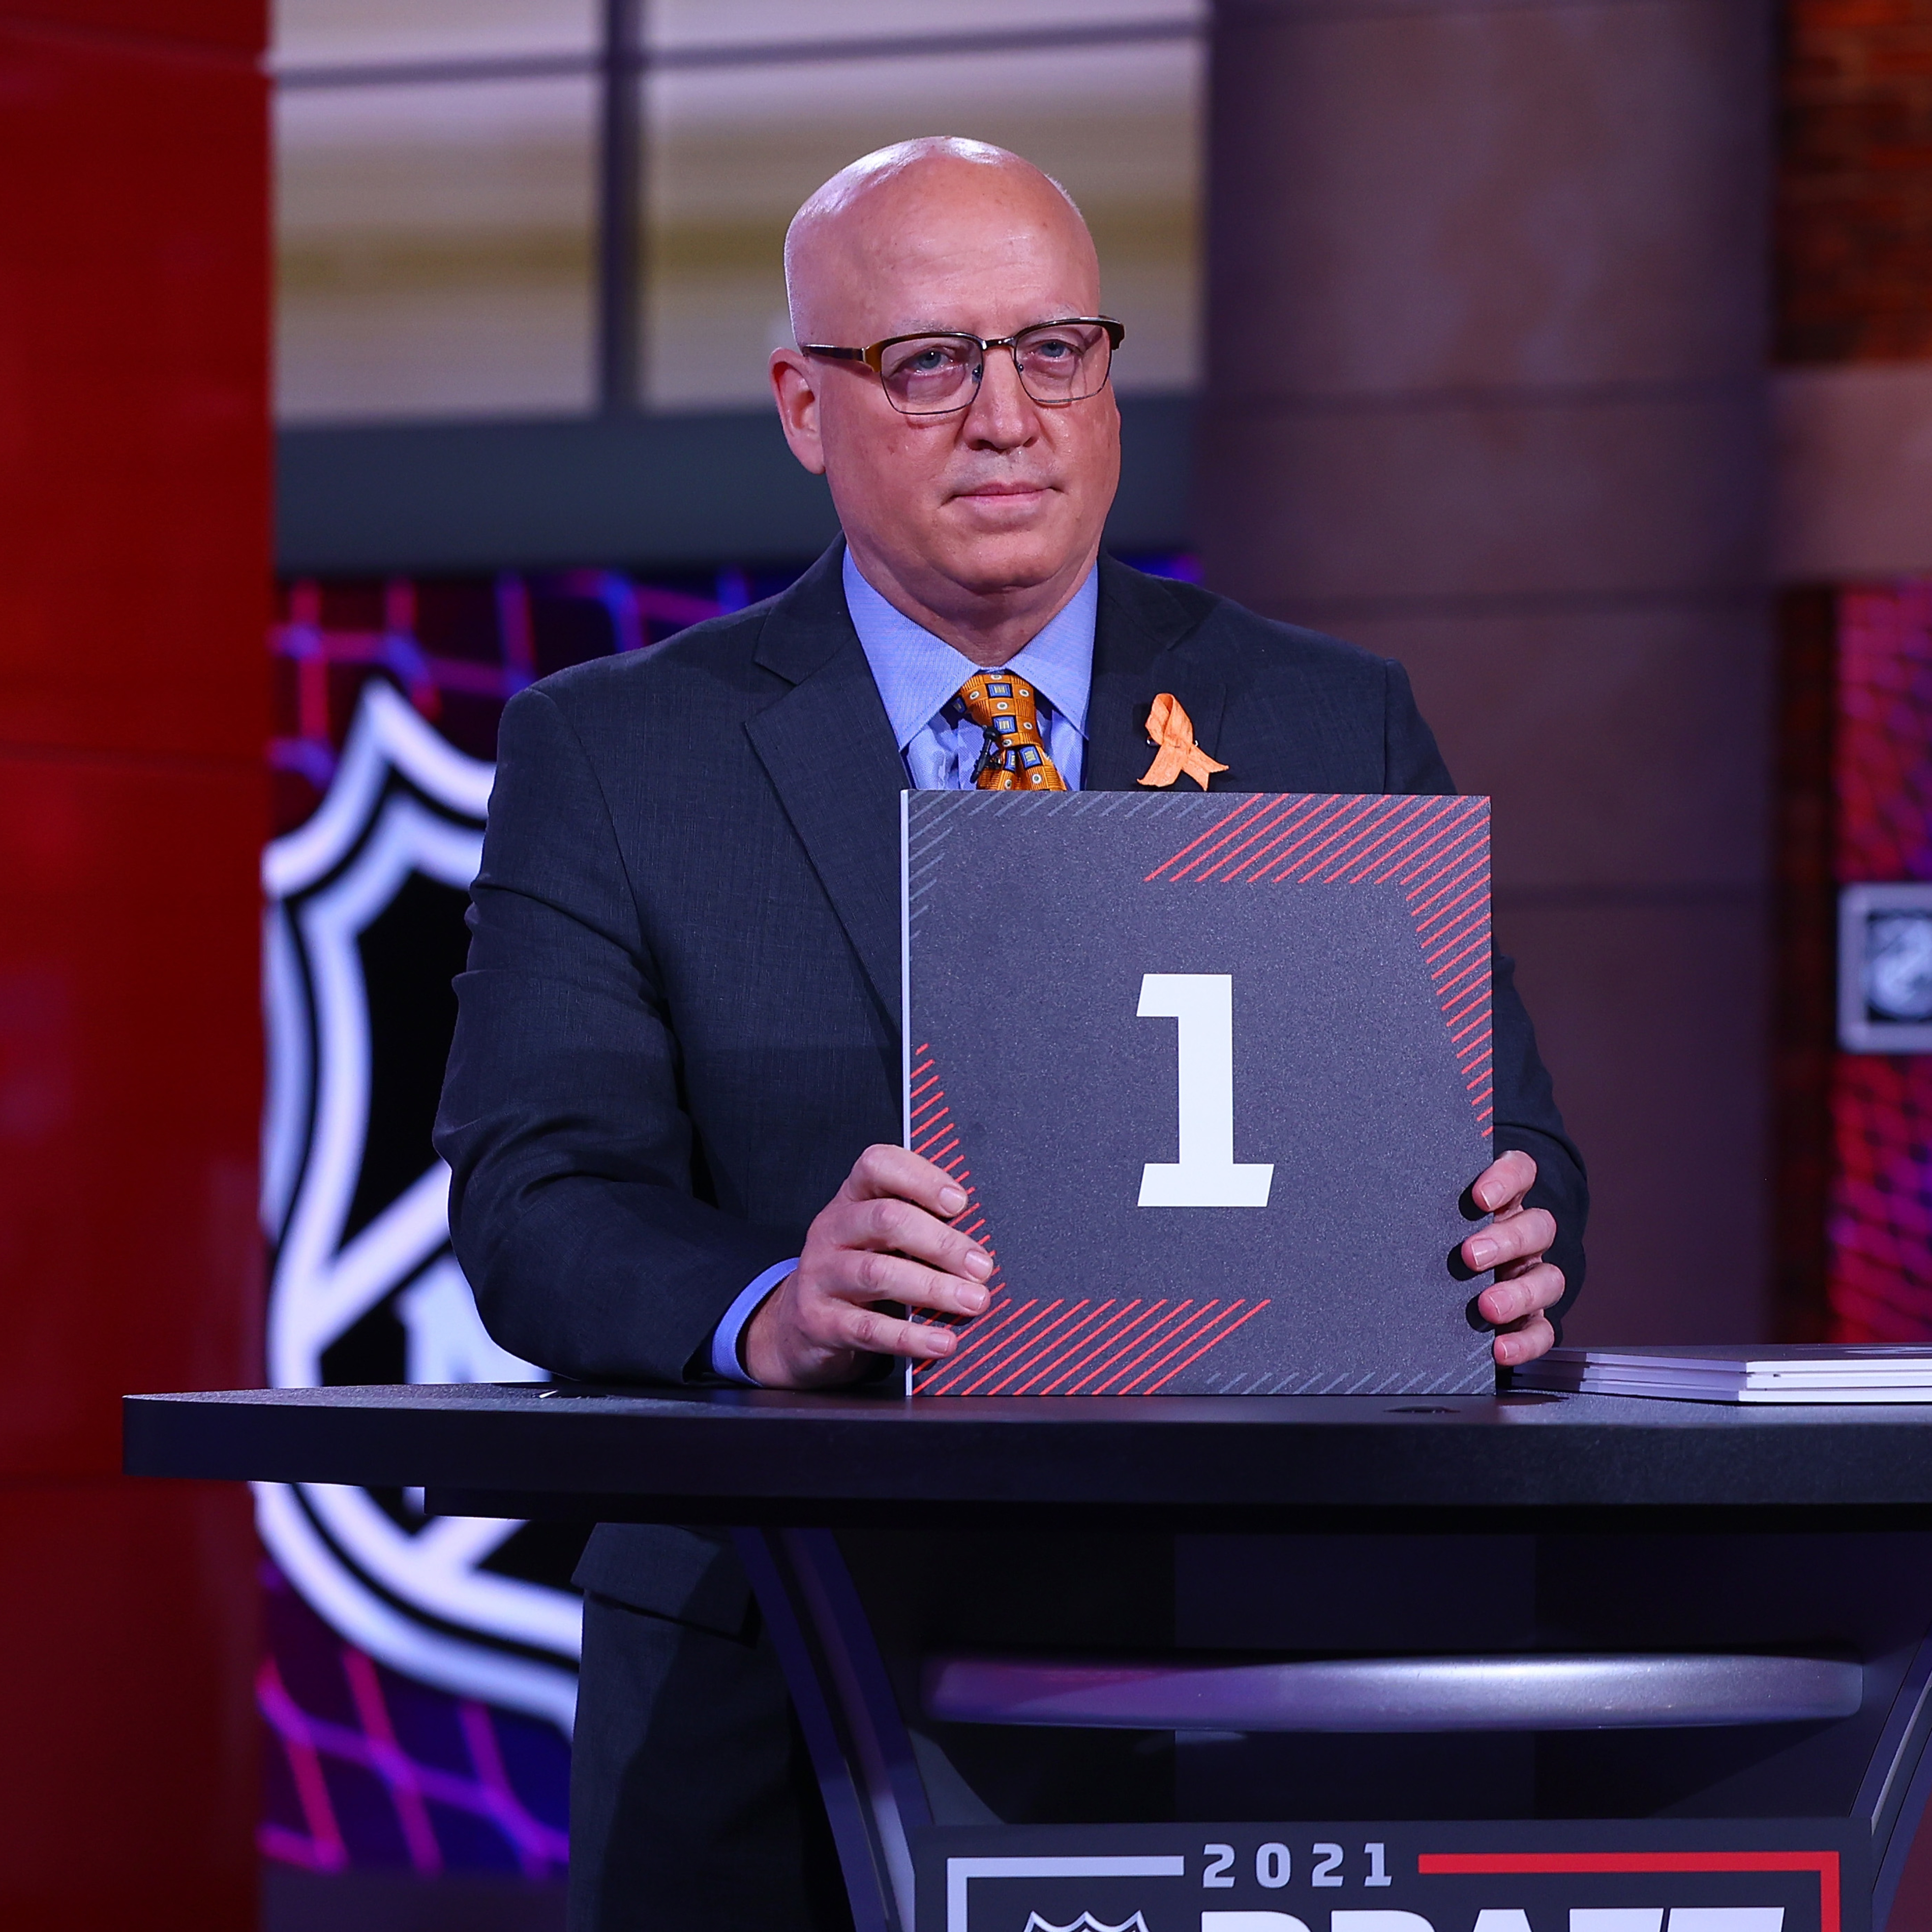 NHL Draft Lottery 2022: Canadiens Win No. 1 Overall Pick, Devils Secure No. 2